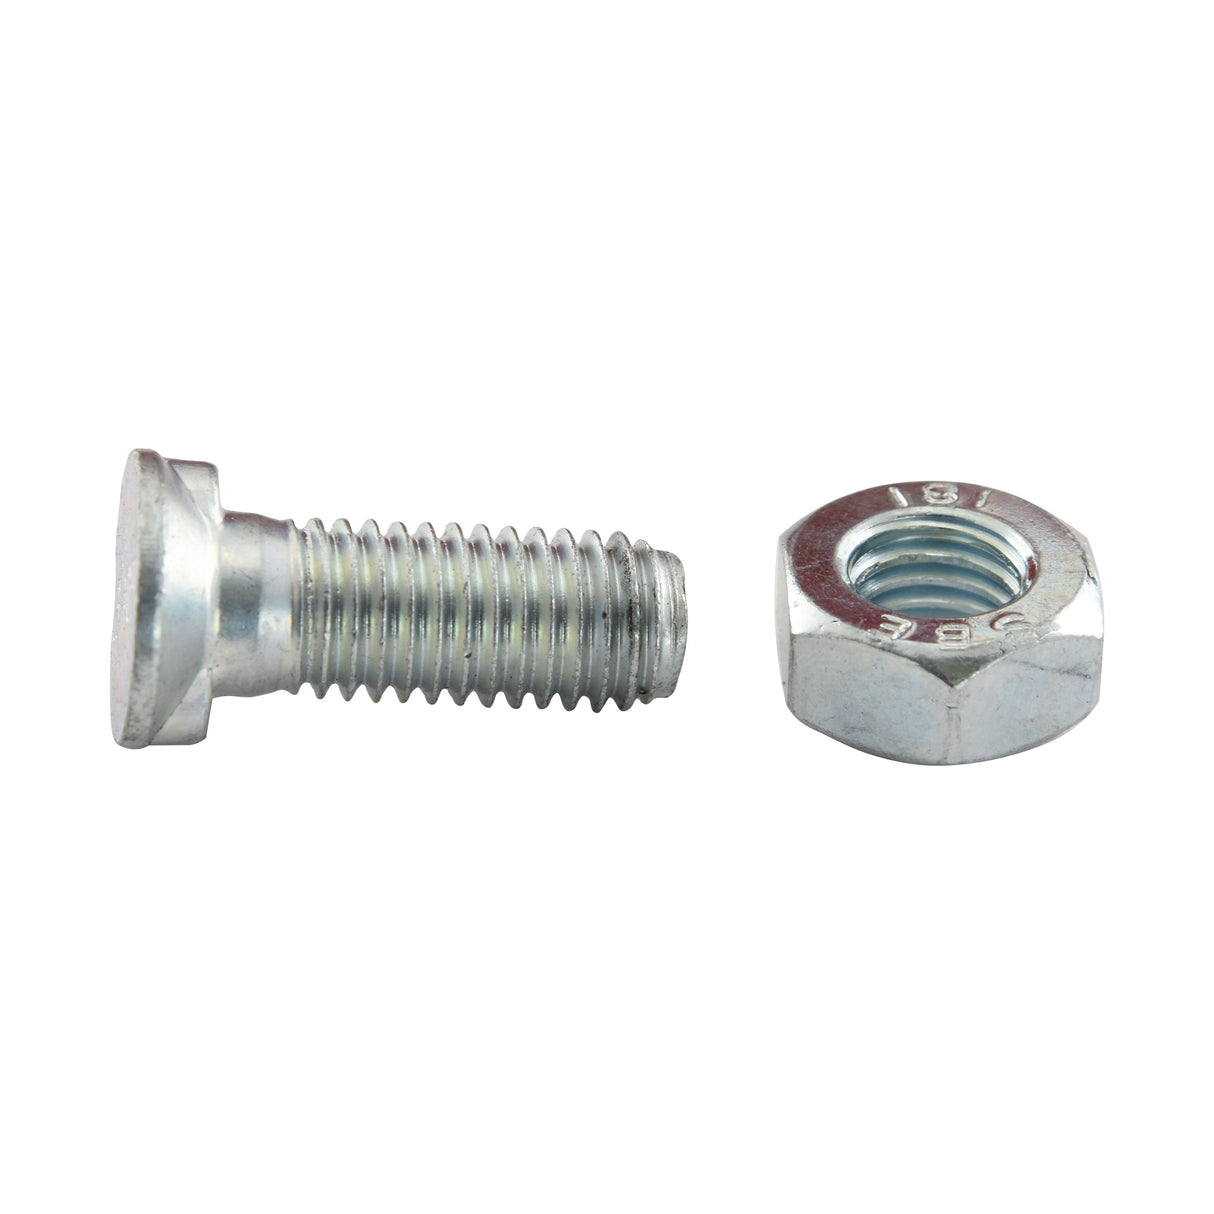 Countersunk Head Bolt 2 Nibs With Nut (TF2E) - M14 x 40mm, Tensile strength 8.8 (25 pcs. Box)
 - S.78101 - Farming Parts